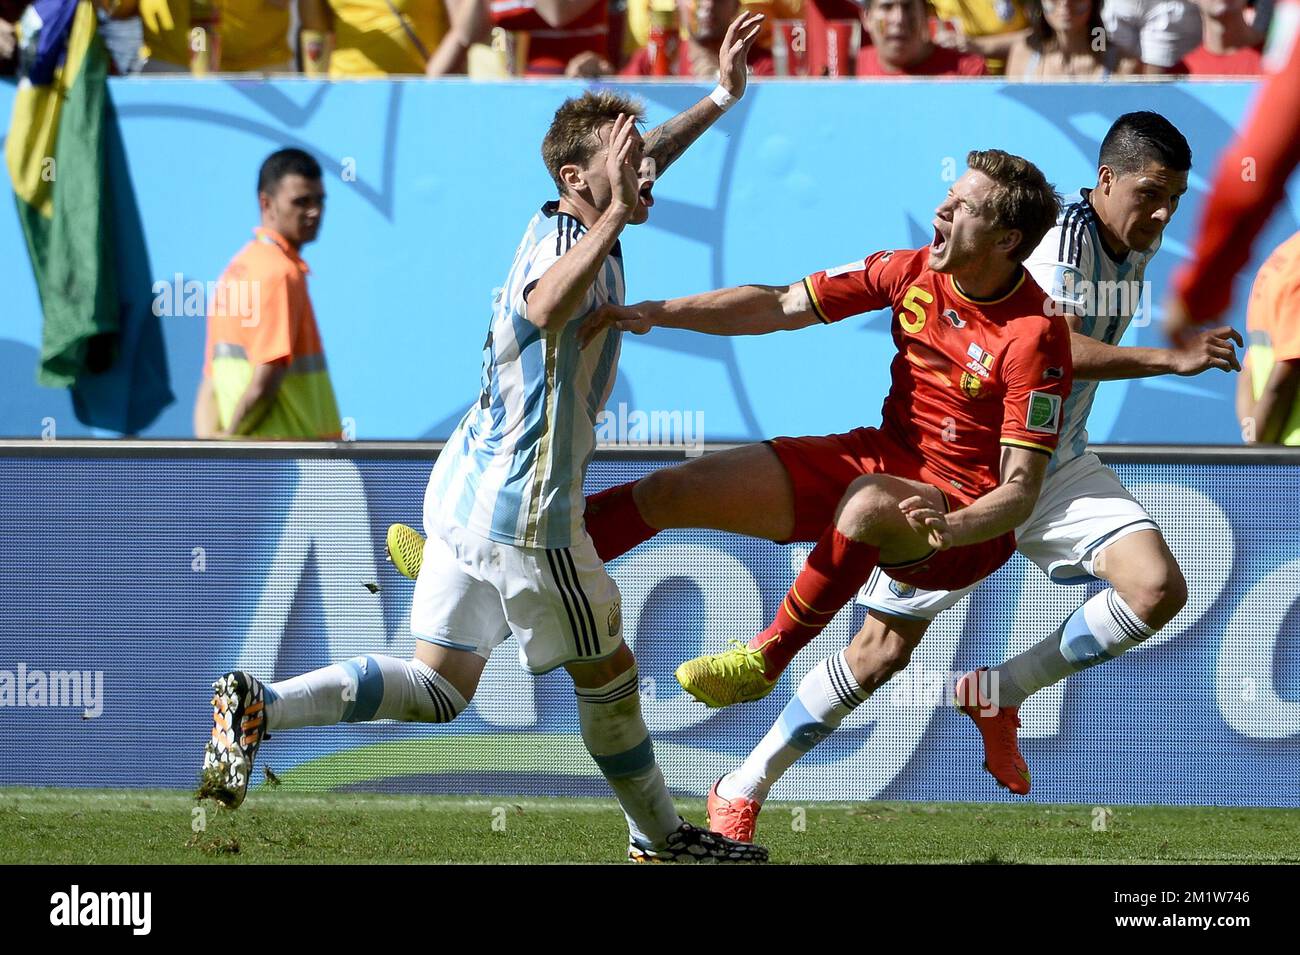 Argentina's Lucas Biglia and Belgium's Jan Vertonghen pictured during the quarter final match between Belgian national soccer team Red Devils and Argentina, in Estadio Nacional Mane Garrincha, in Brasilia, Brazil, during the 2014 FIFA World Cup, Saturday 05 July 2014.  Stock Photo